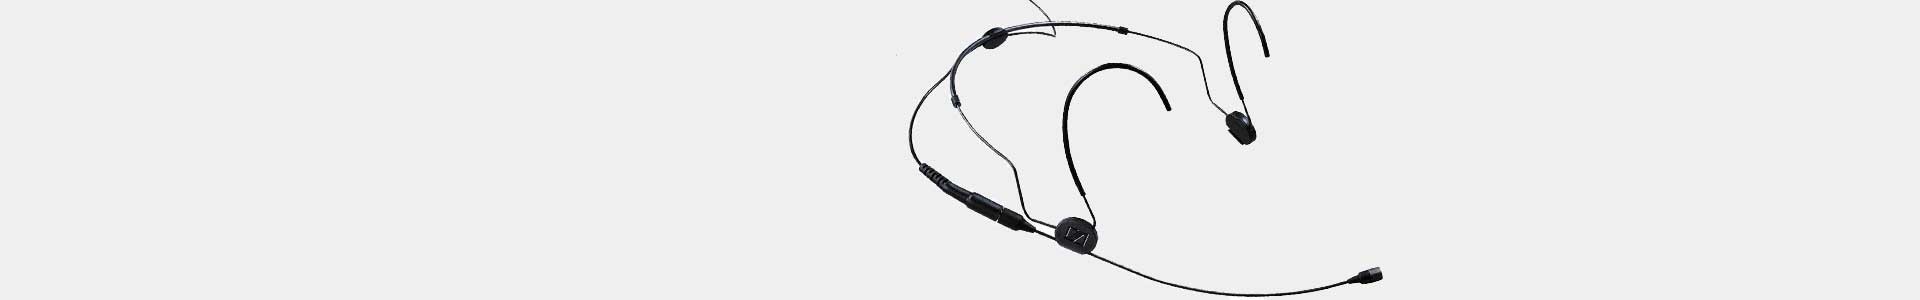 Headset Microphones for professionals - Avacab